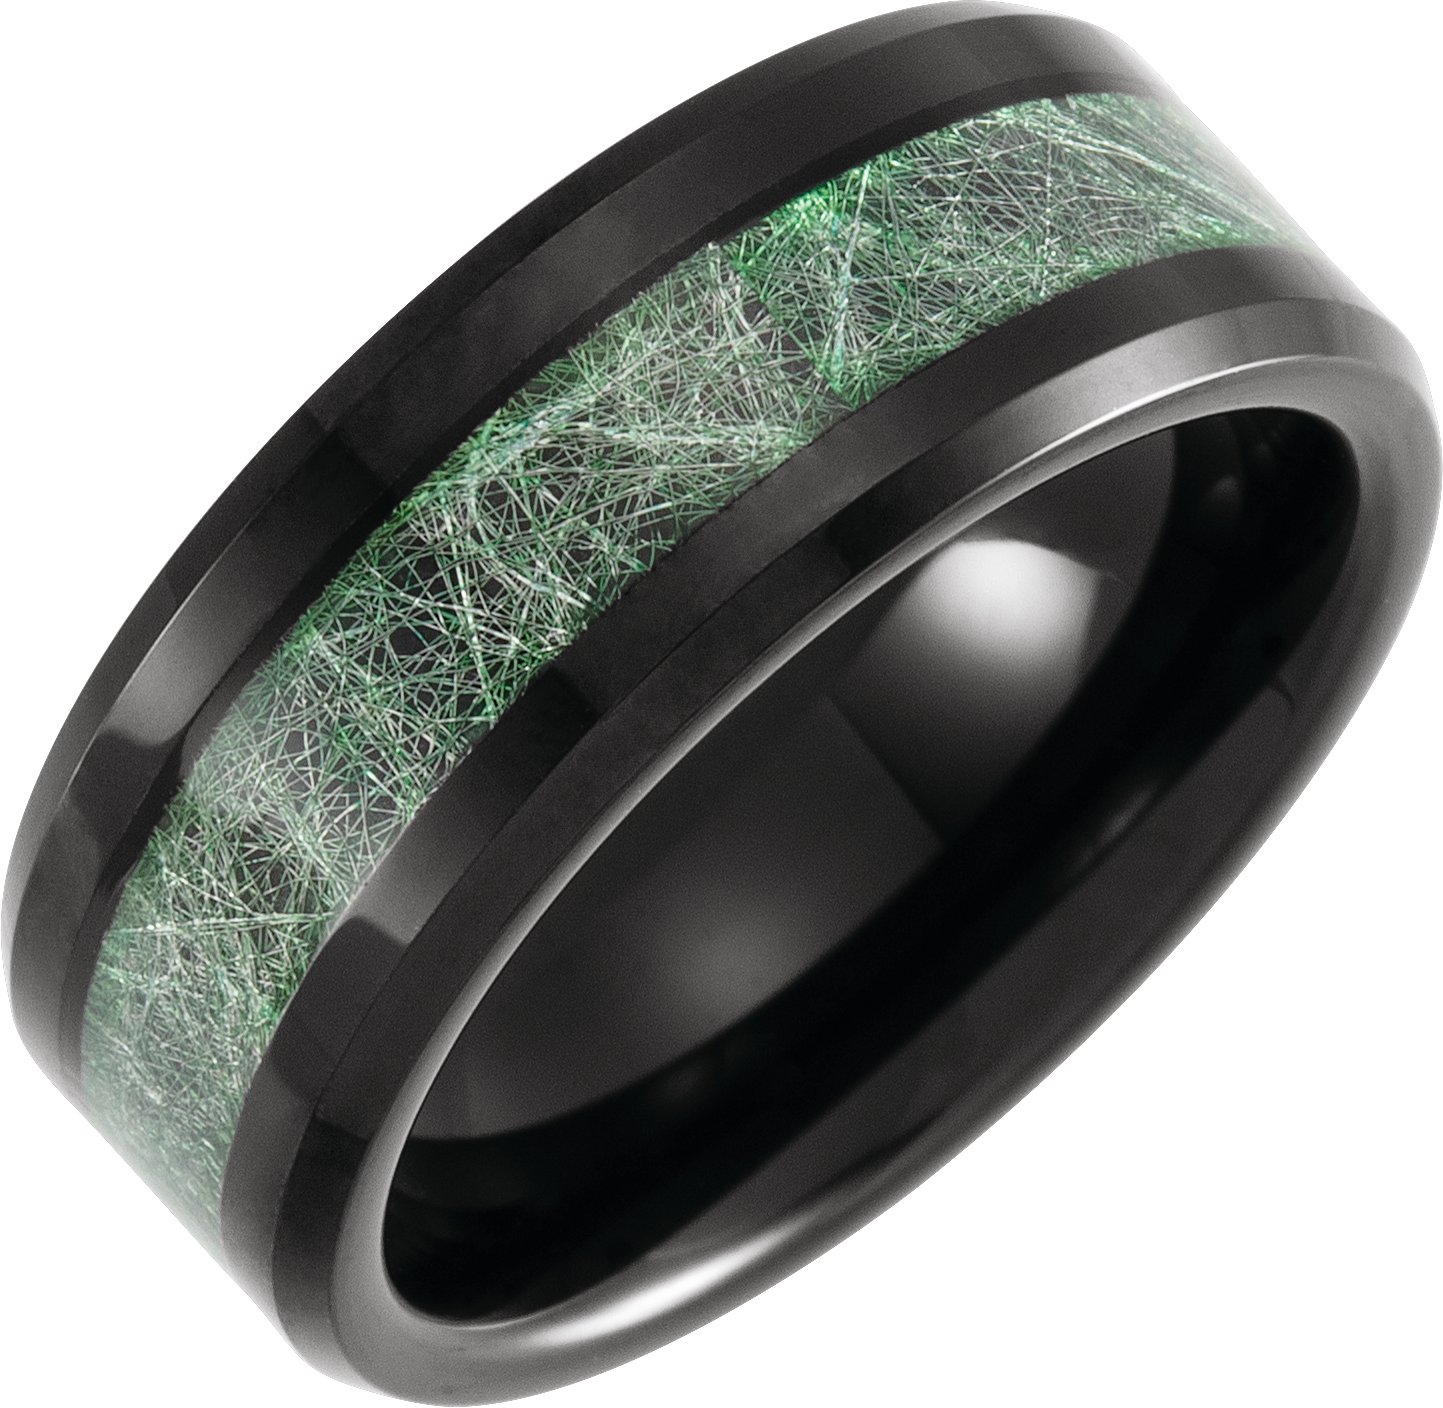 Tungsten 8 mm Beveled Band with Imitation Meteorite Inlay Size 7.5